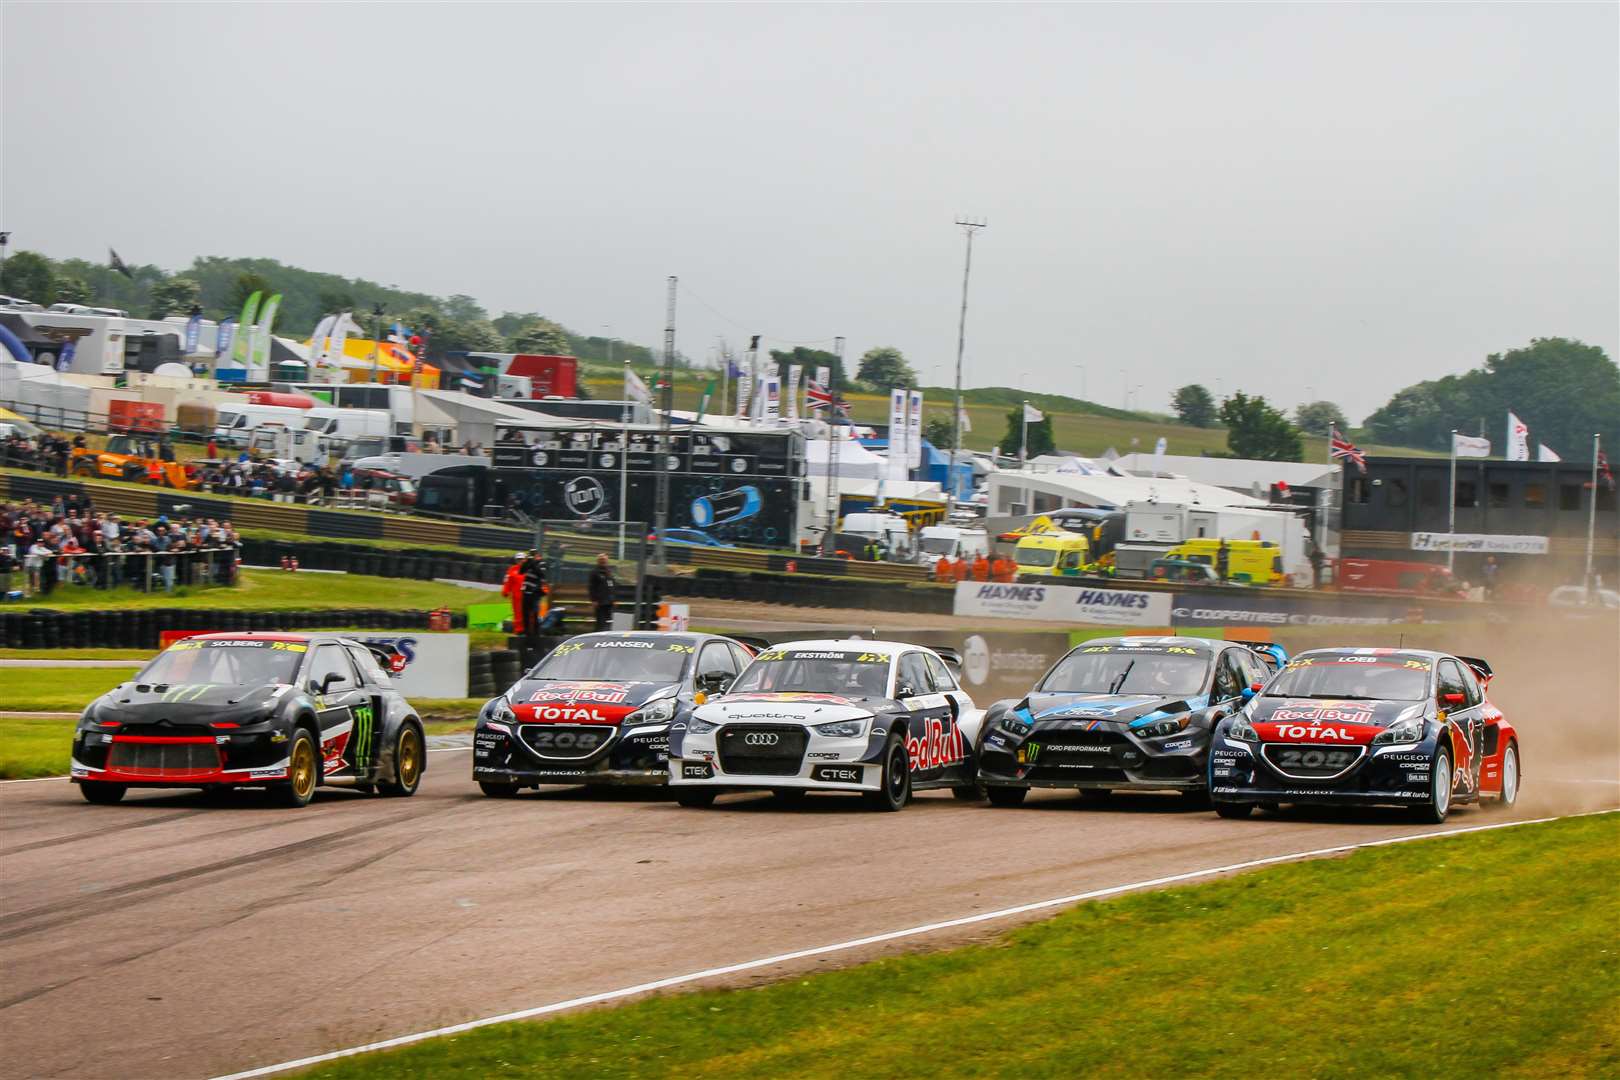 The FIA World Rallycross Championship visits Kent in May